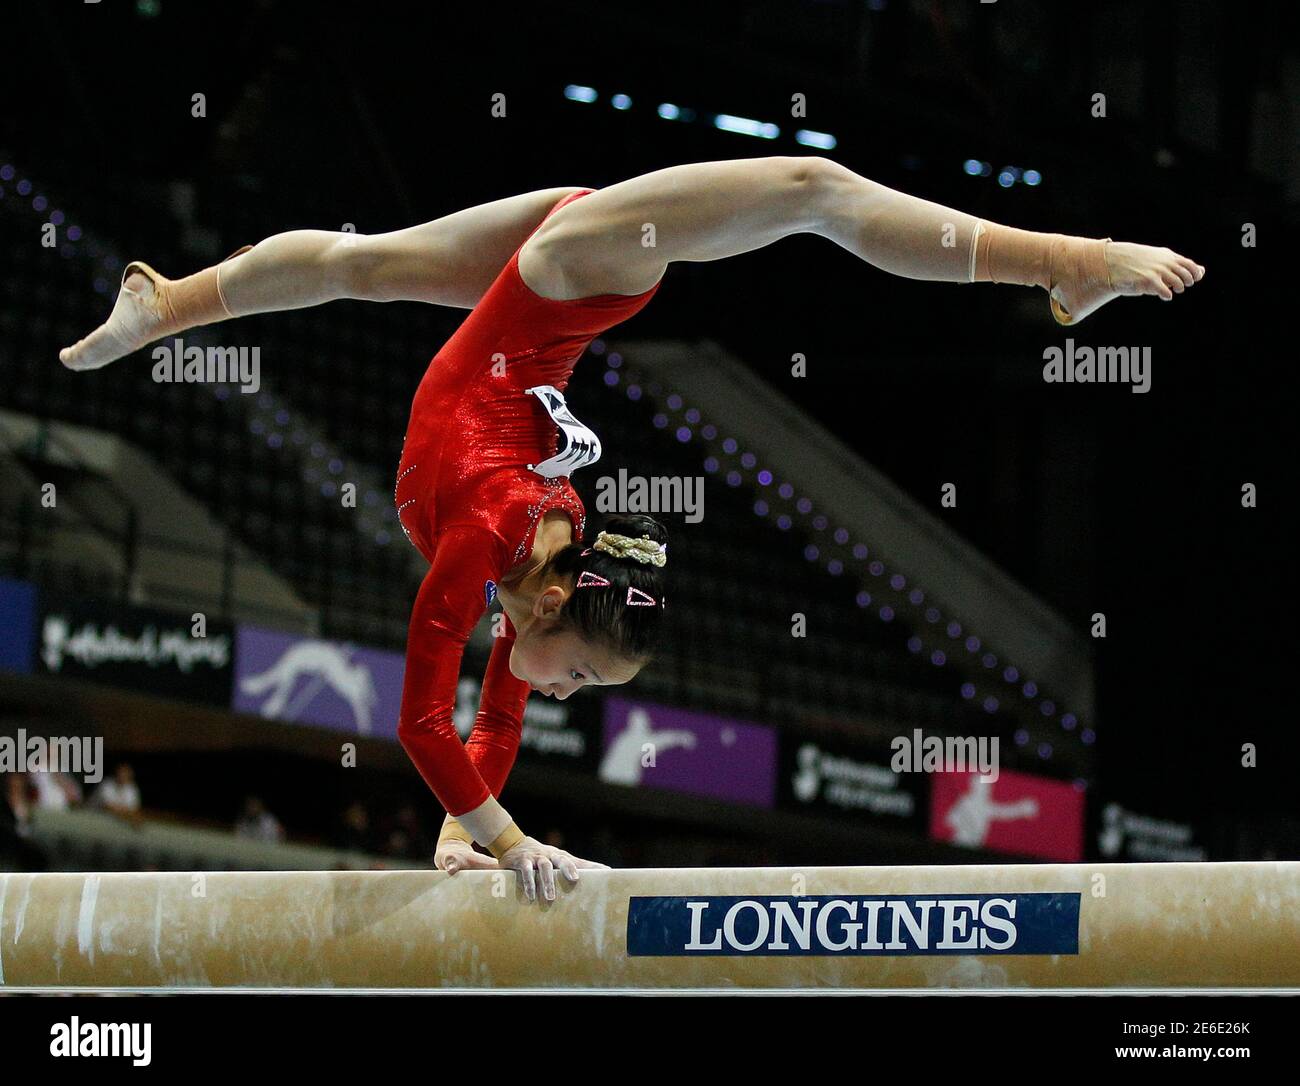 China's Huang Qiushuang performs on the beam during the women's artistic  Gymnastics World Championships at the Ahoy Arena in Rotterdam October 16,  2010. REUTERS/Jerry Lampen (NETHERLANDS - Tags: SPORT GYMNASTICS Stock  Photo - Alamy